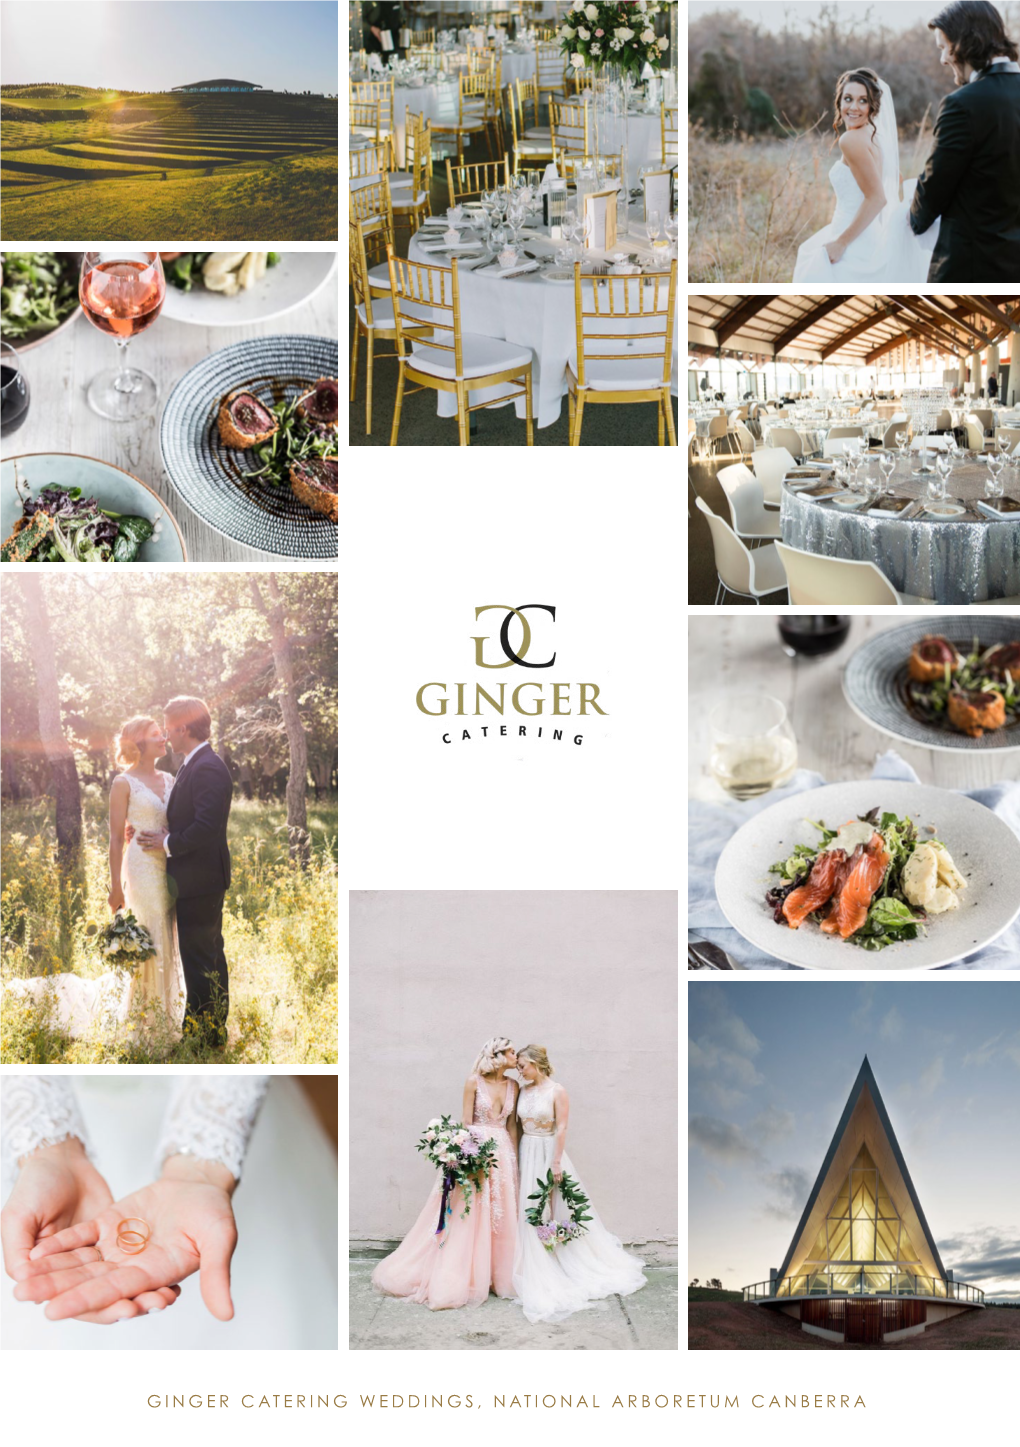 GINGER CATERING WEDDINGS, NATIONAL ARBORETUM CANBERRA Theescape CITY